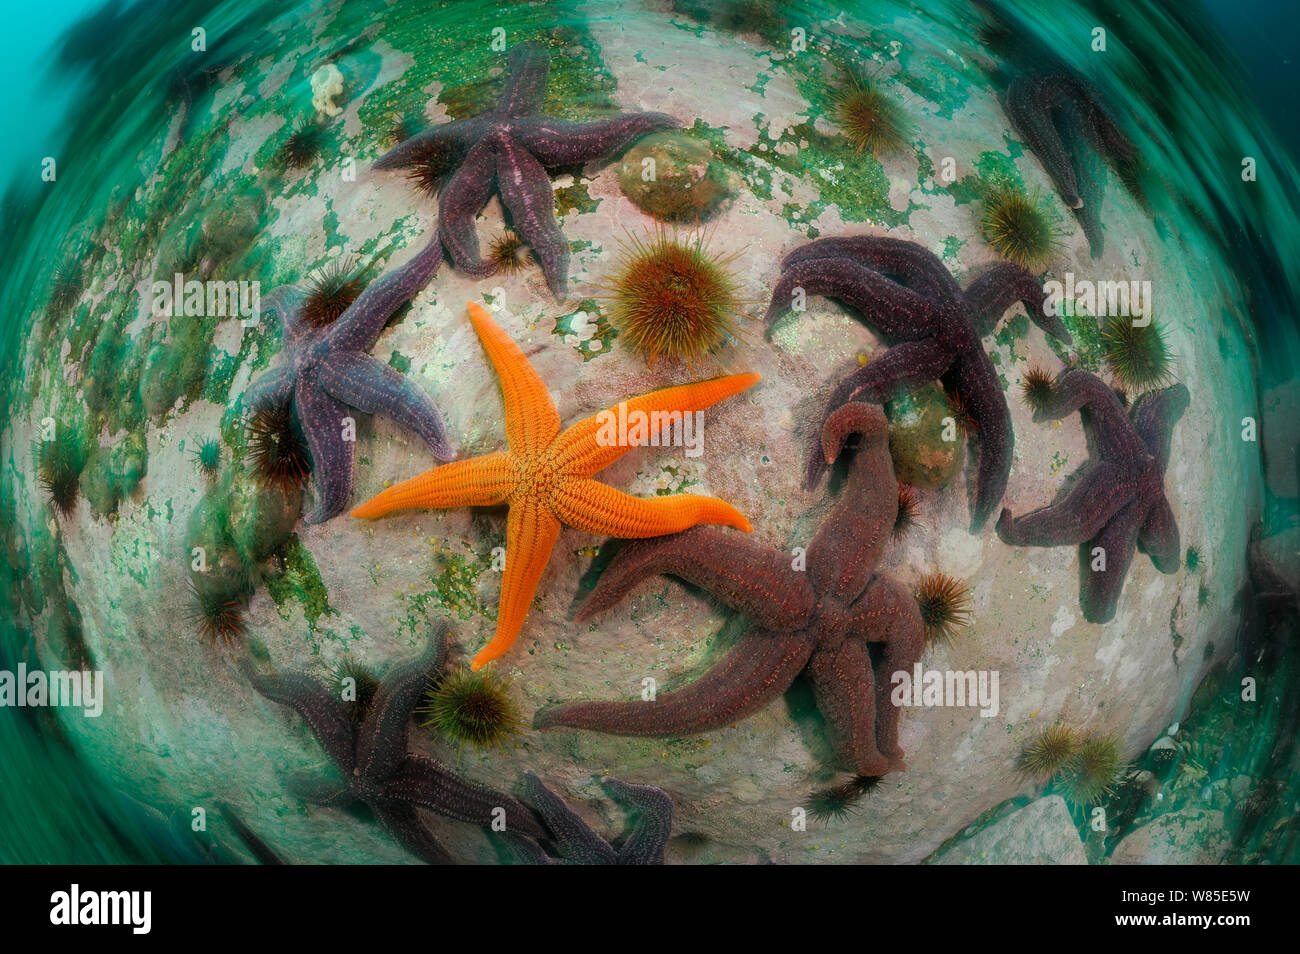 Sea stars including in the centre : Common light striated star (Stichaster striatus) surrounded by Common fjord starfish (Cosmasterias lurida), Comau Ford, Chile. Stock Photo